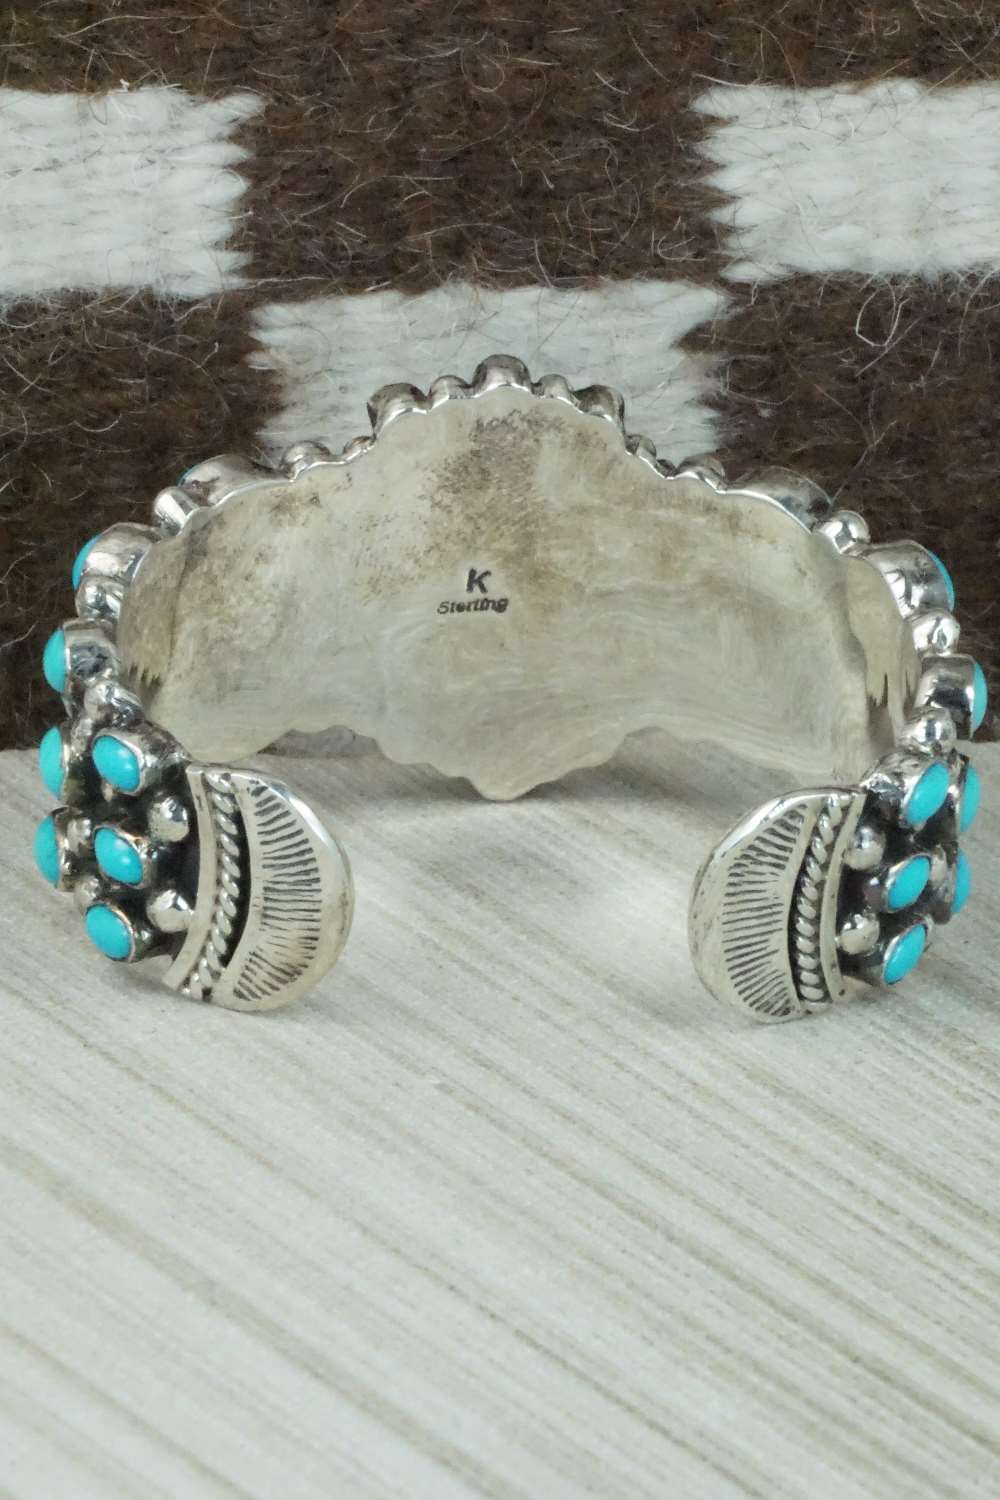 Turquoise and Sterling Silver Bracelet - Kenneth Jones